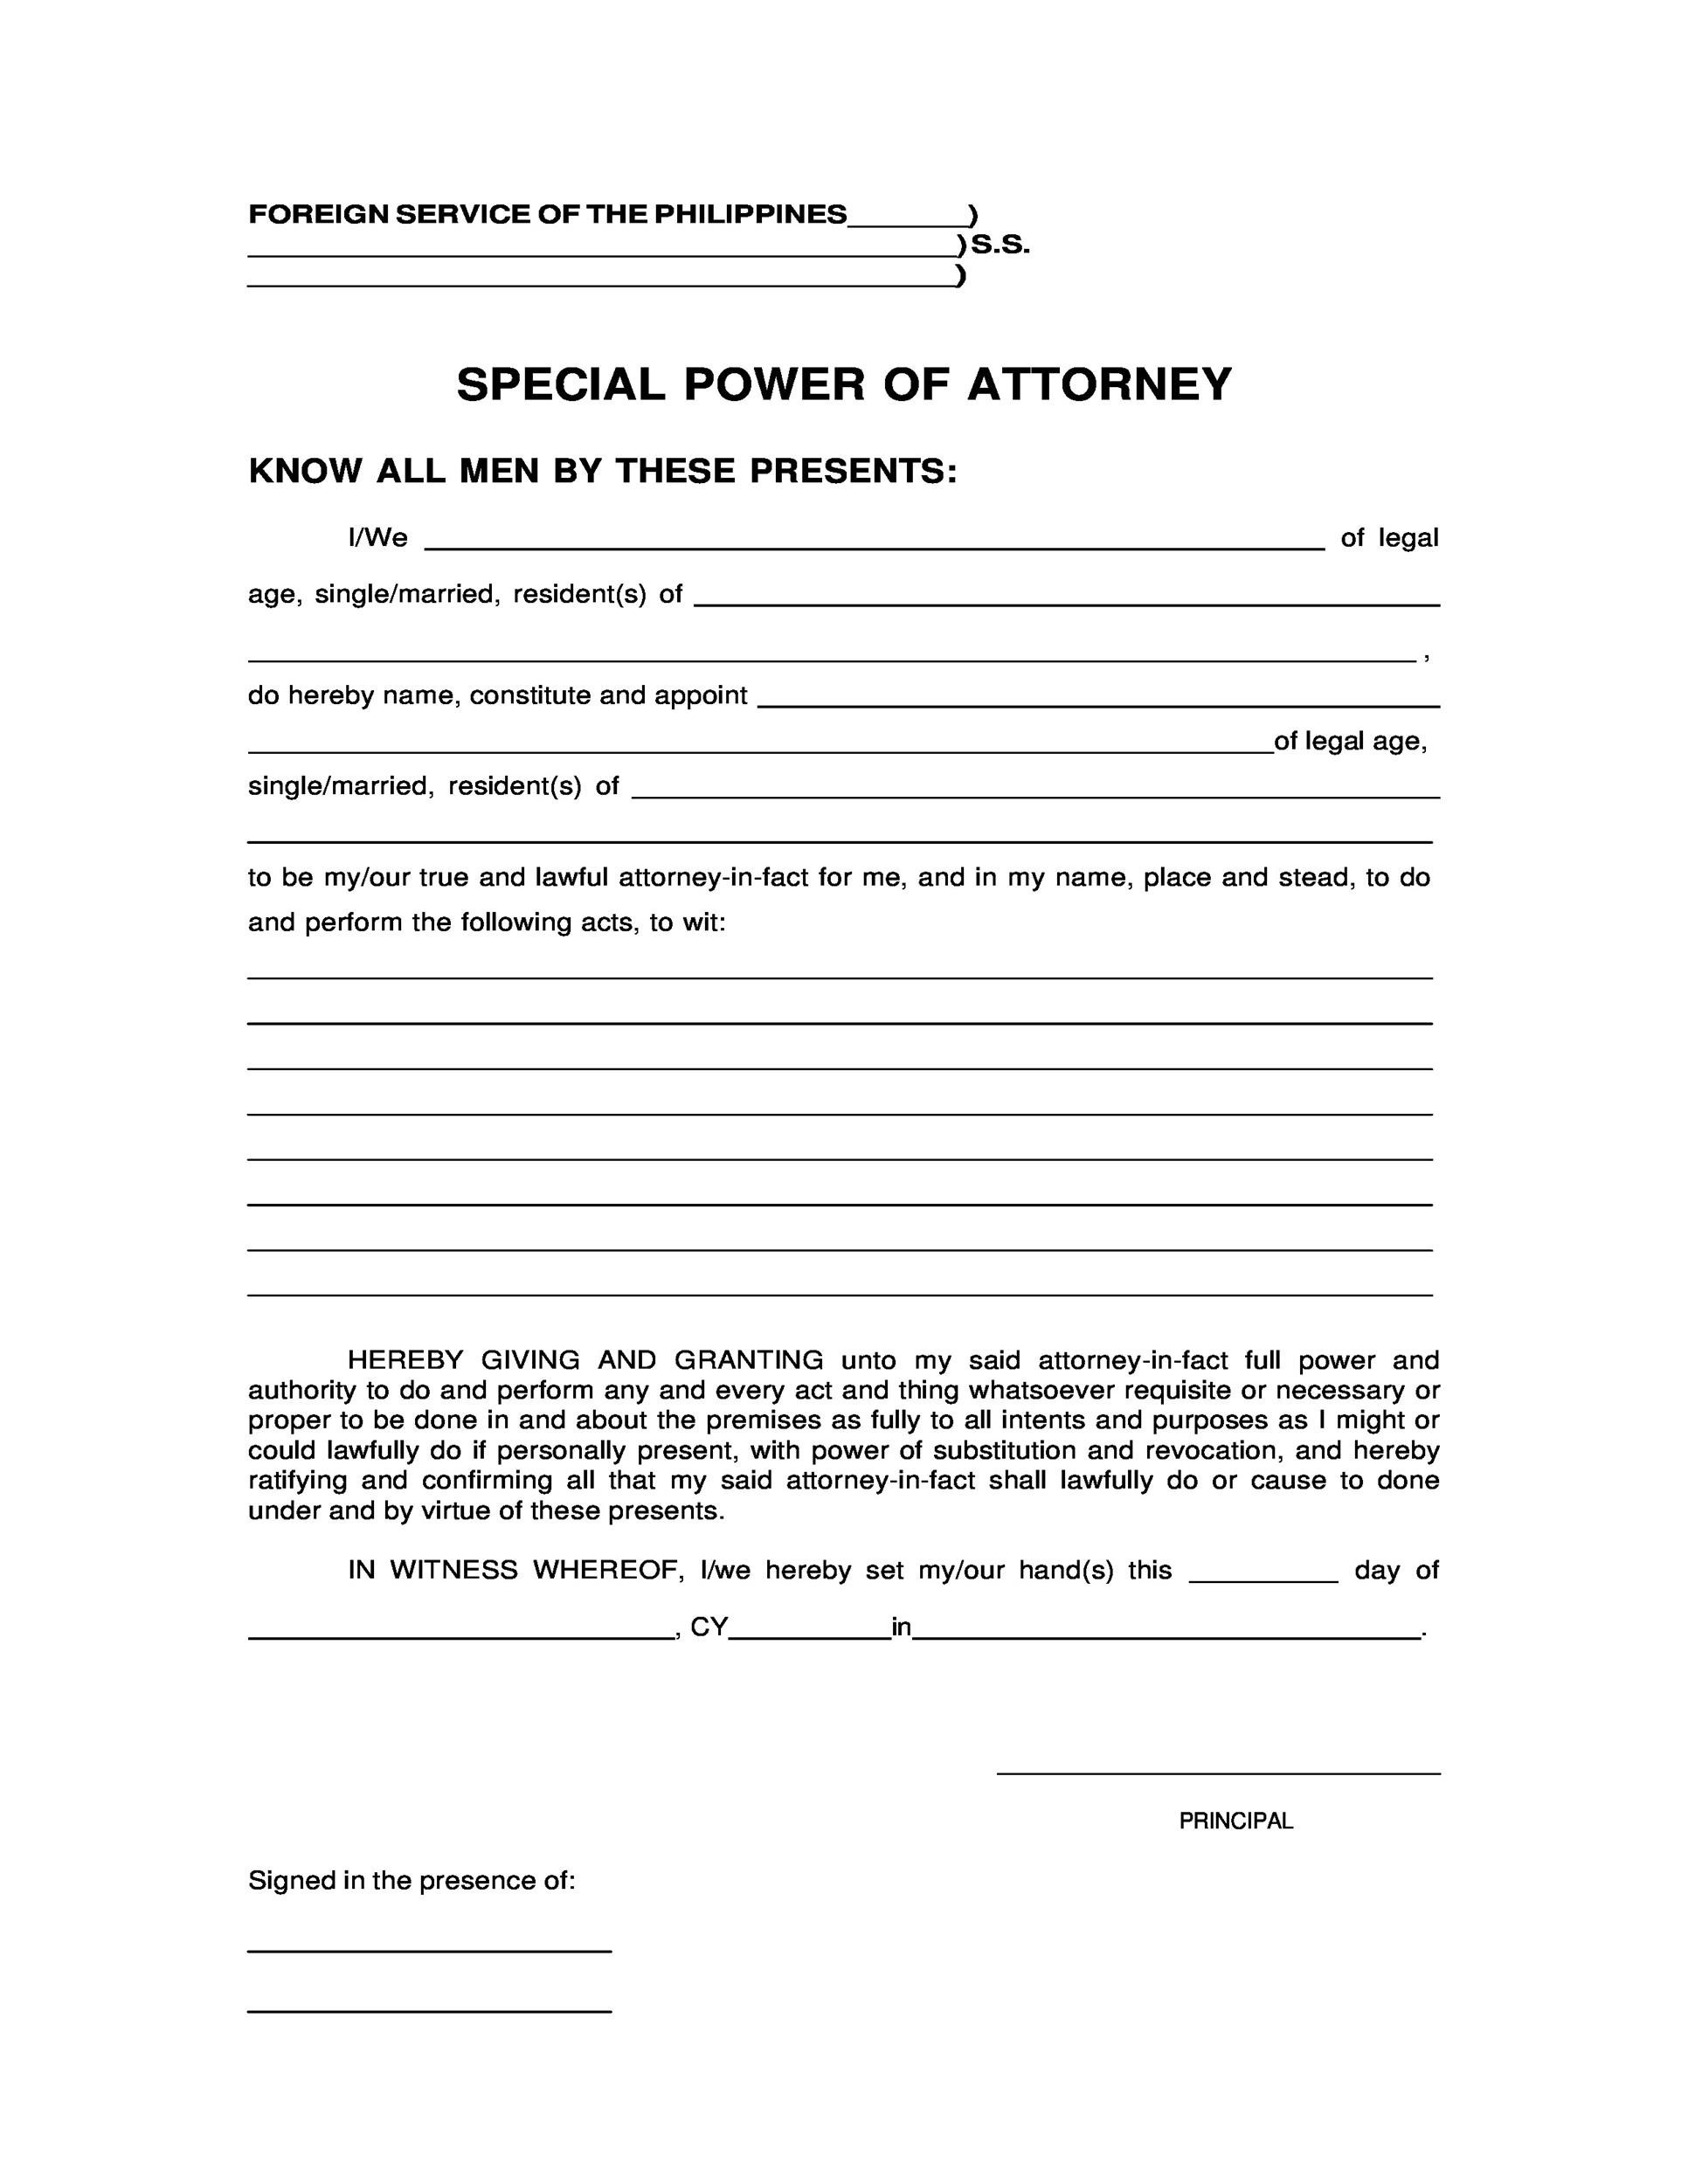 50 Free Power of Attorney Forms & Templates (Durable, Medical,General)